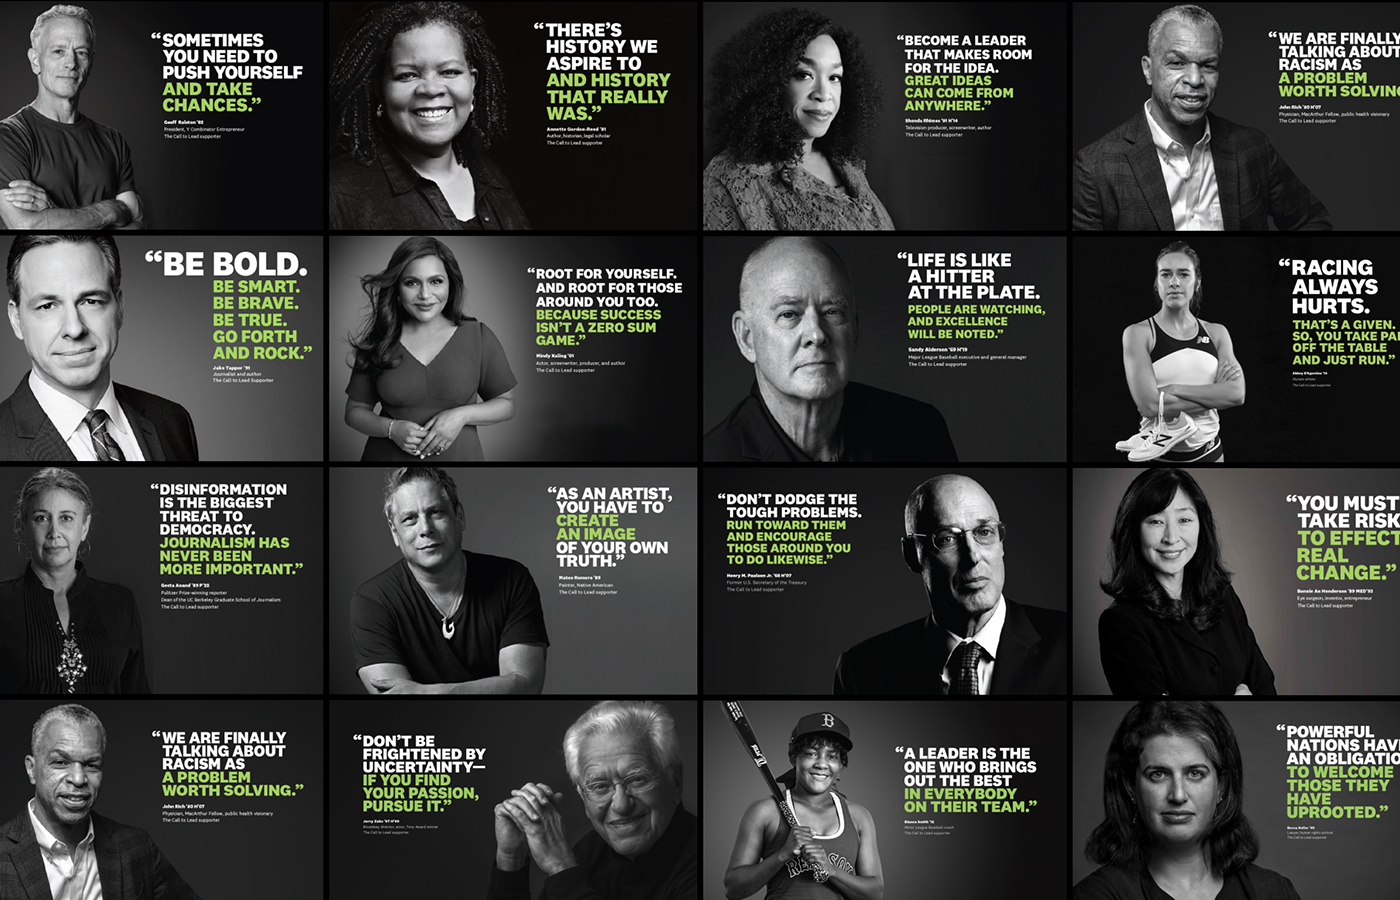 Collage of leadership features with headshots and quotes for each featured leader